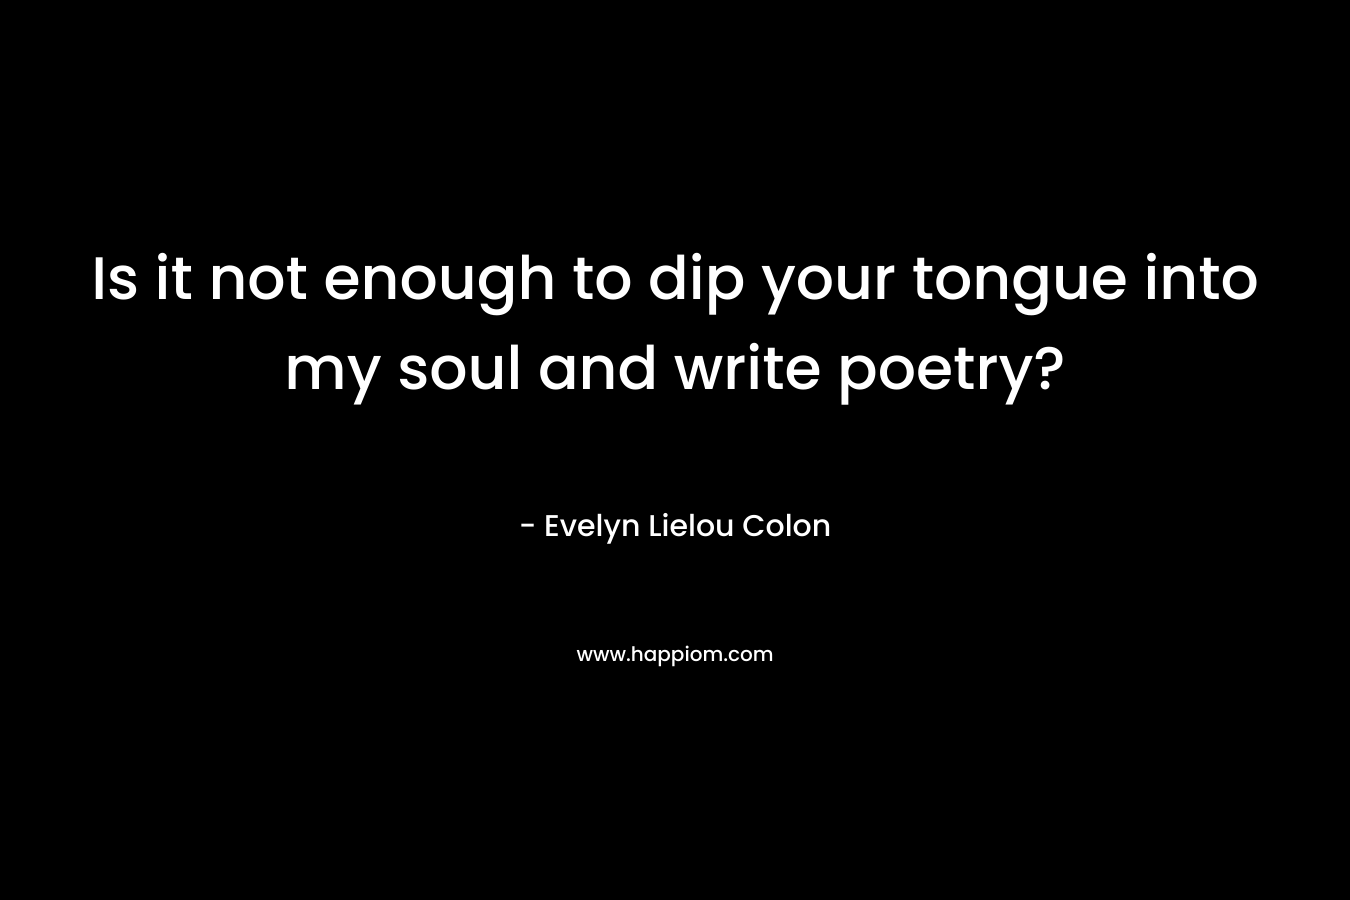 Is it not enough to dip your tongue into my soul and write poetry?